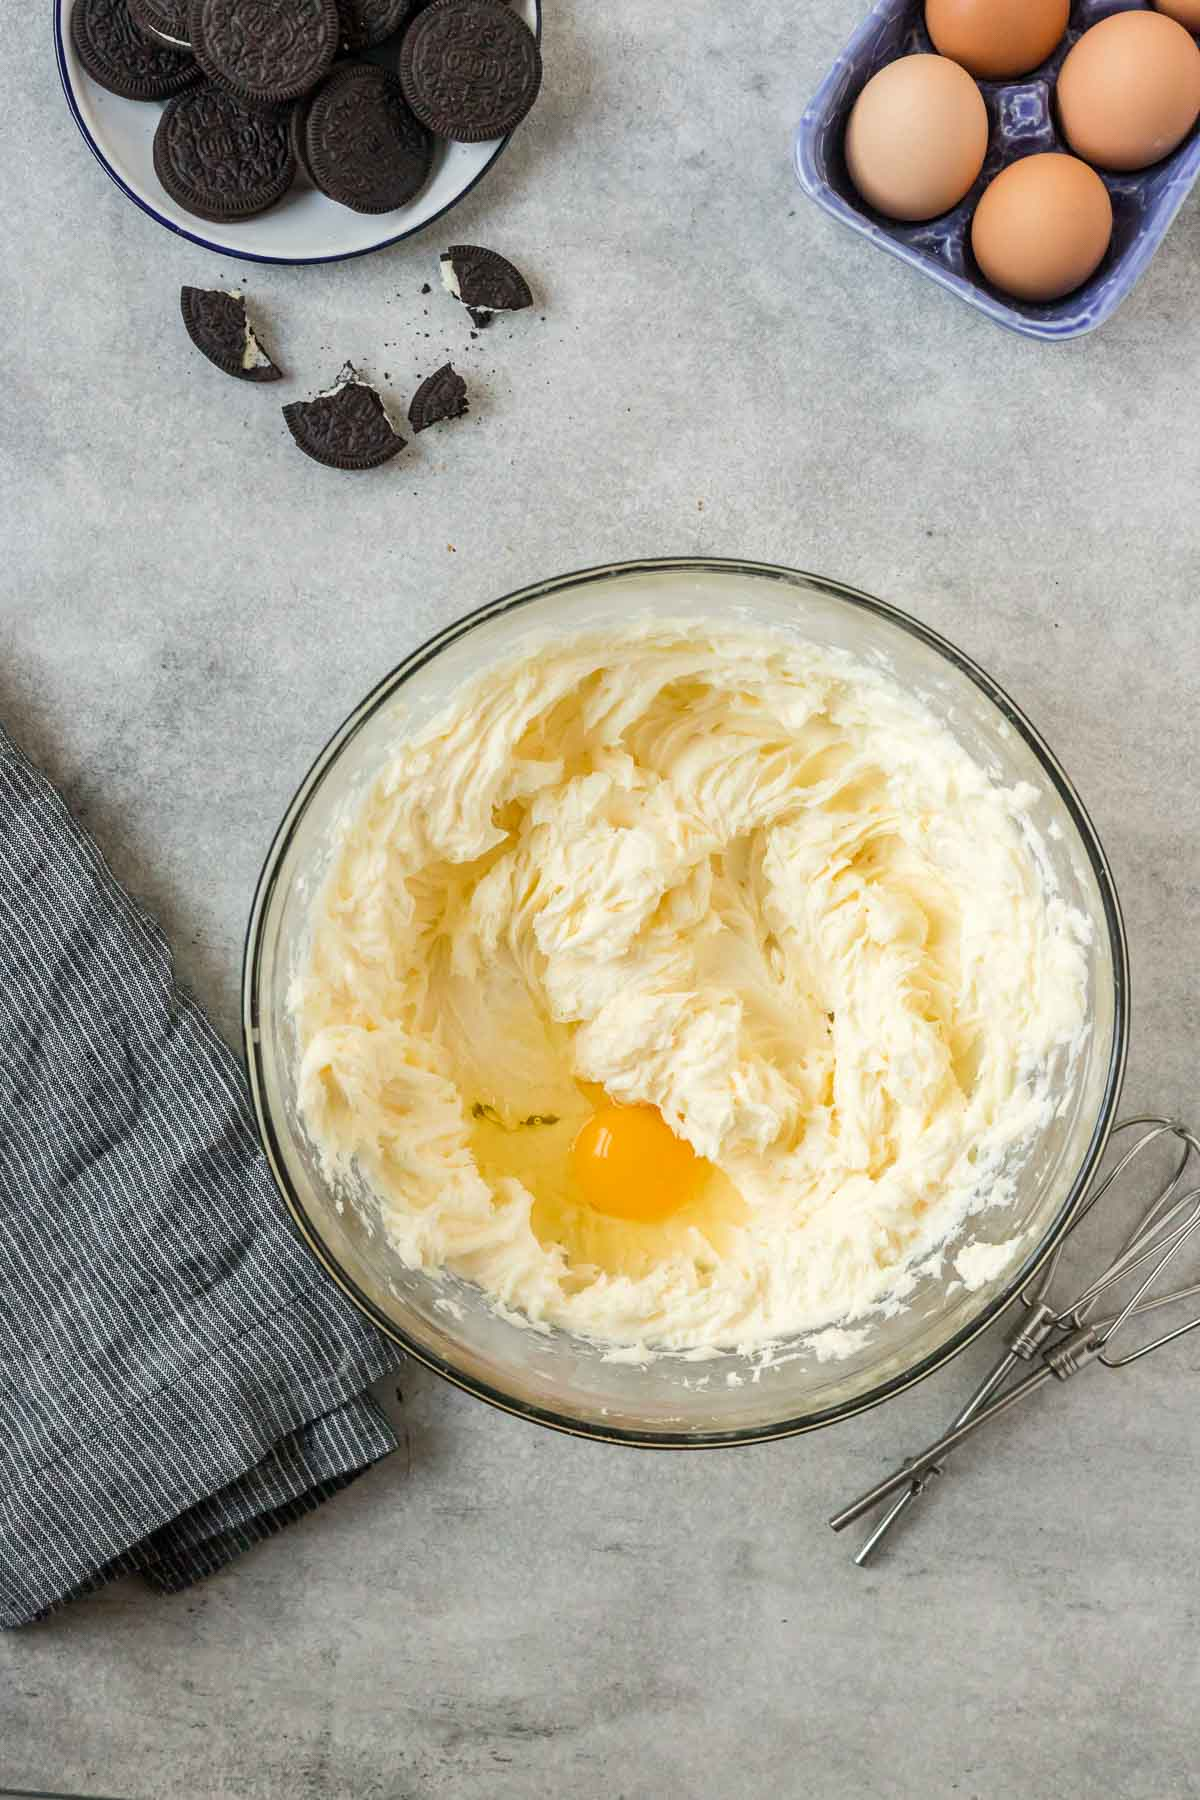 egg added to cheesecake mixture in bowl